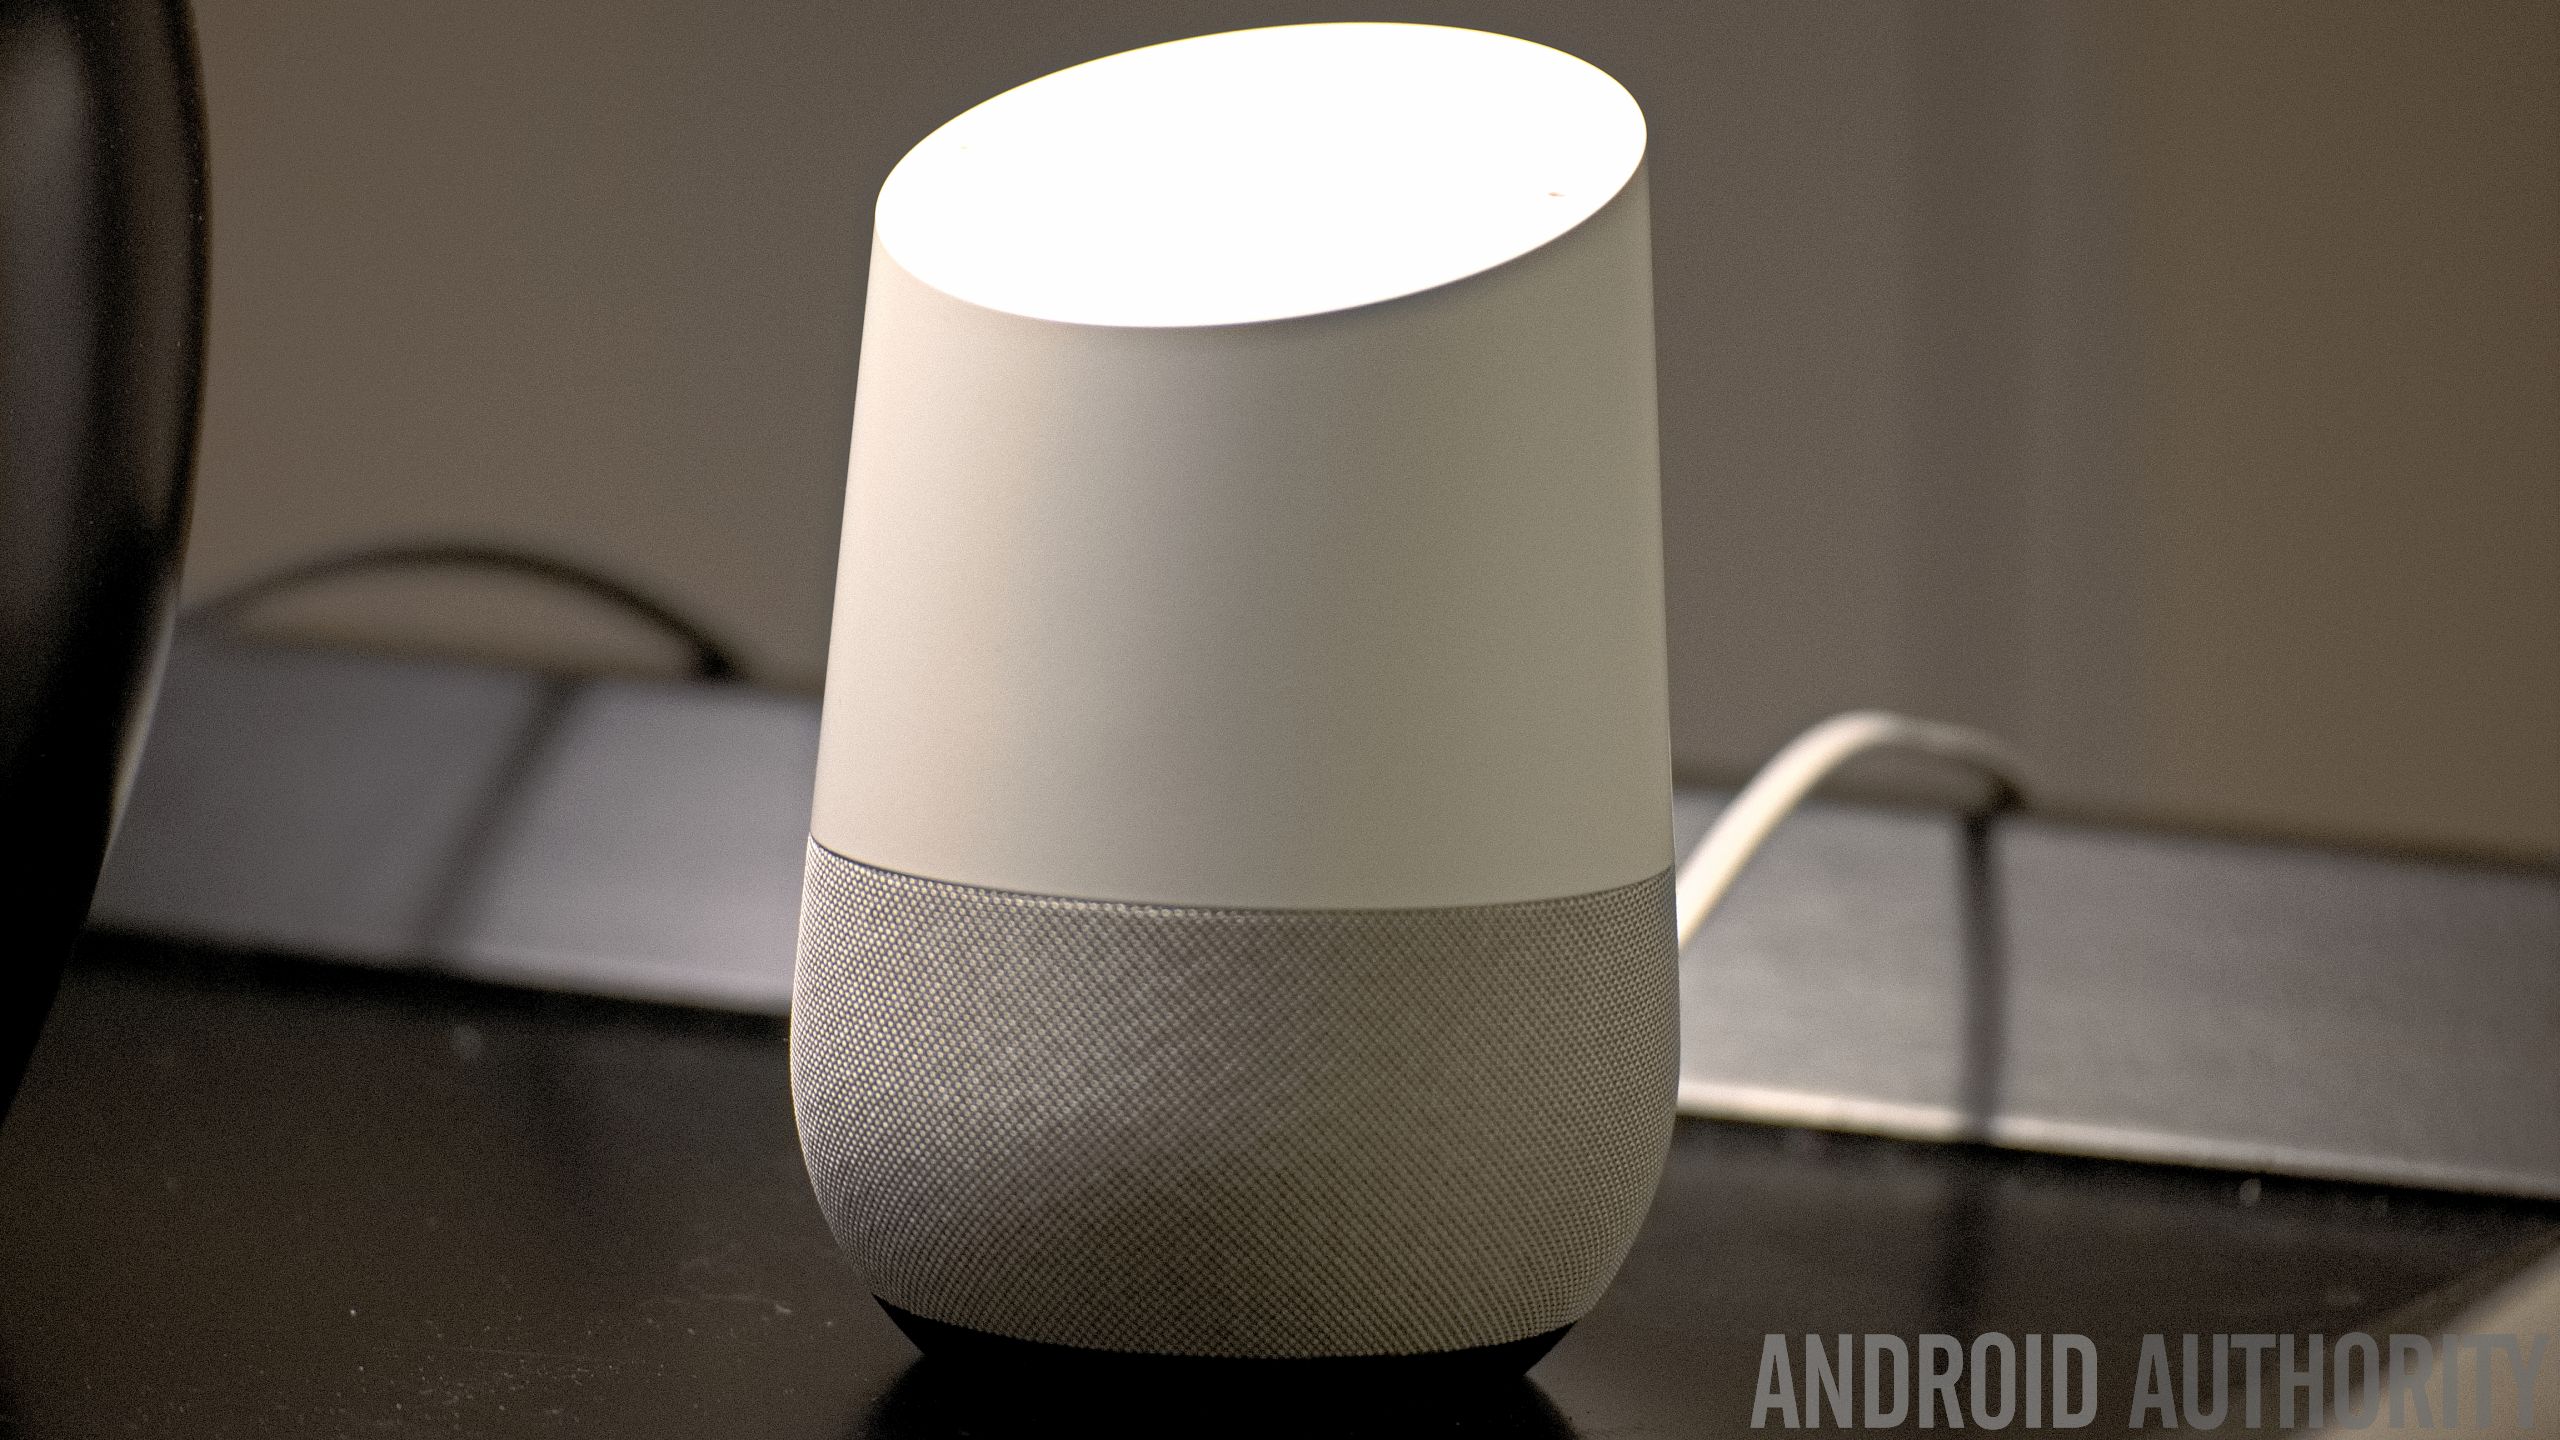 This is a picture of Google Home and also the featured image for the best Google Home apps